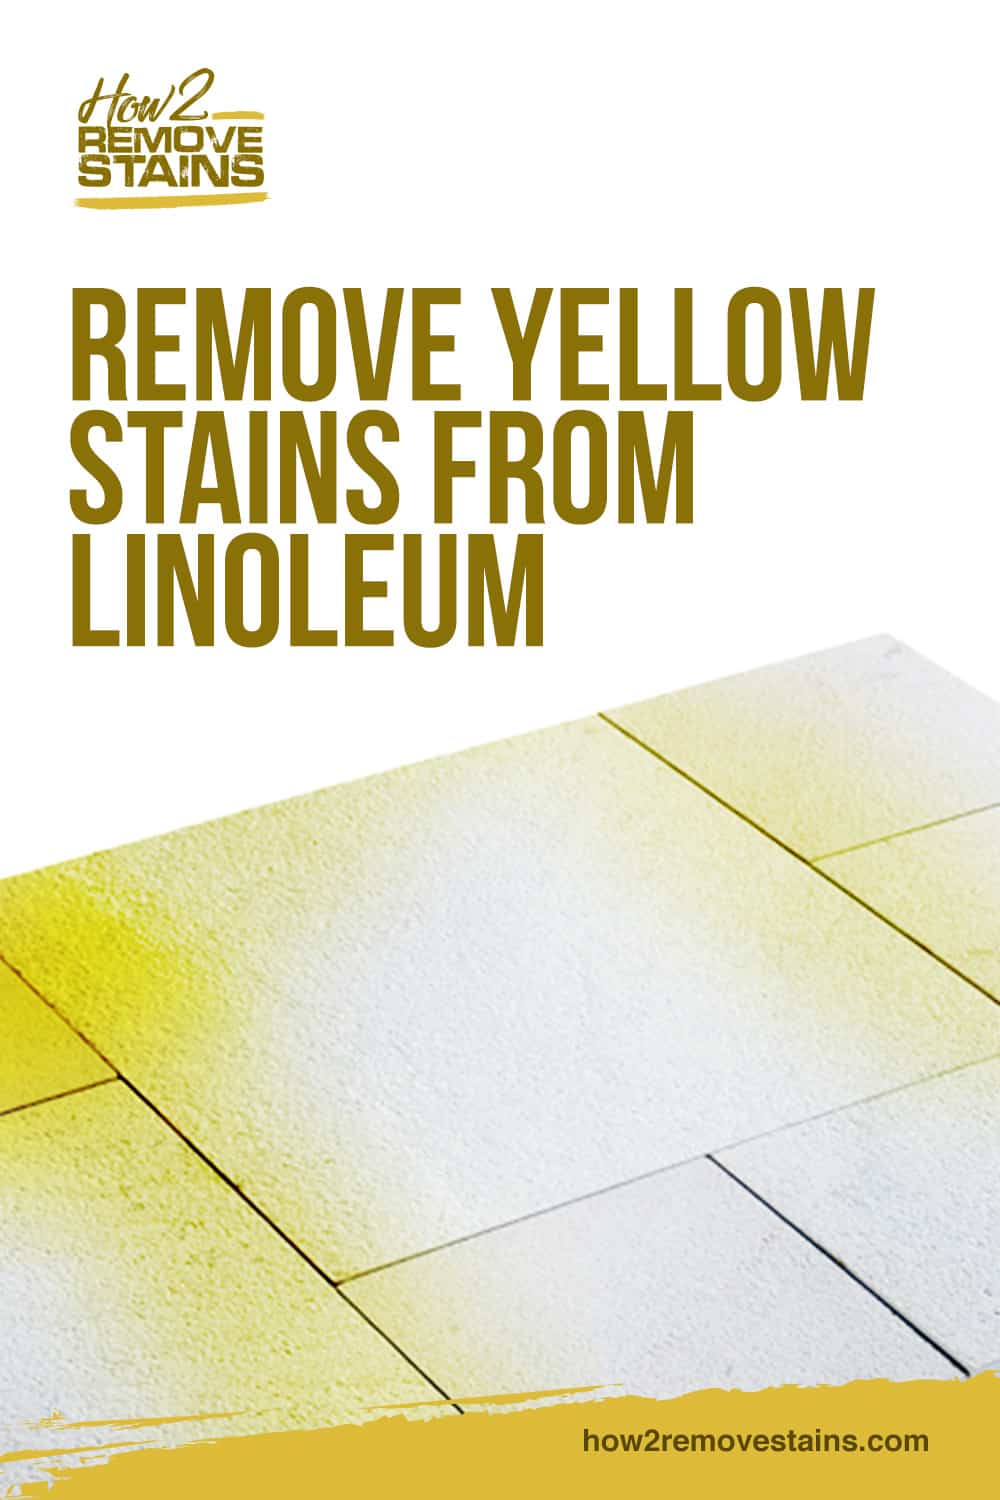 Remove Yellow Stains From Linoleum, How To Clean Yellowing Vinyl Flooring